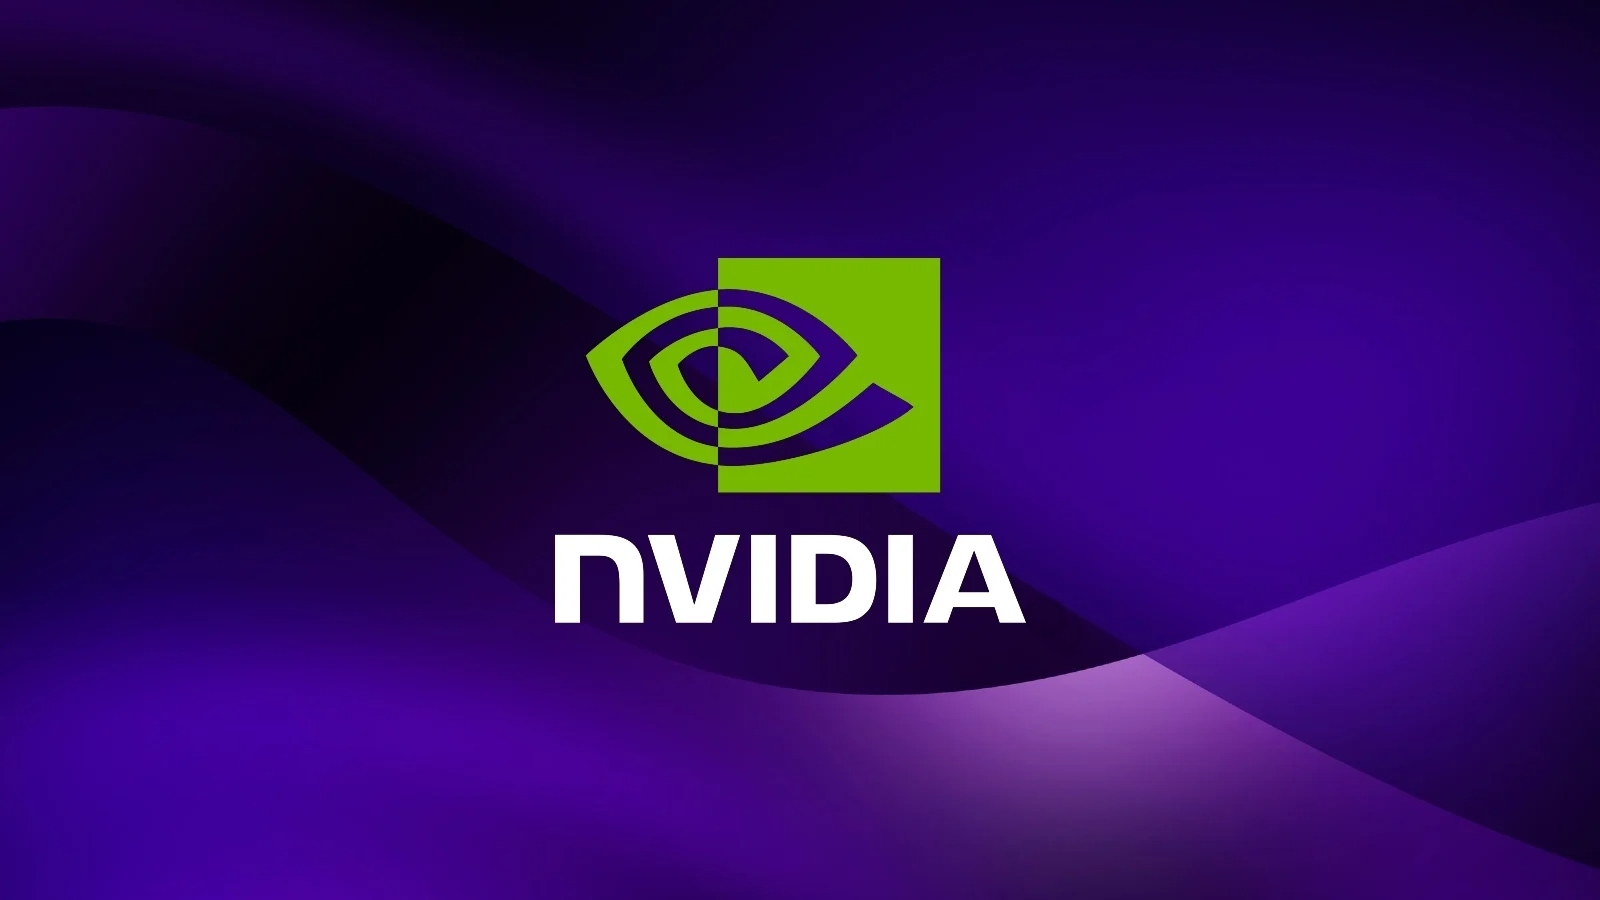 NVIDIA confirms data was stolen in recent cyberattack